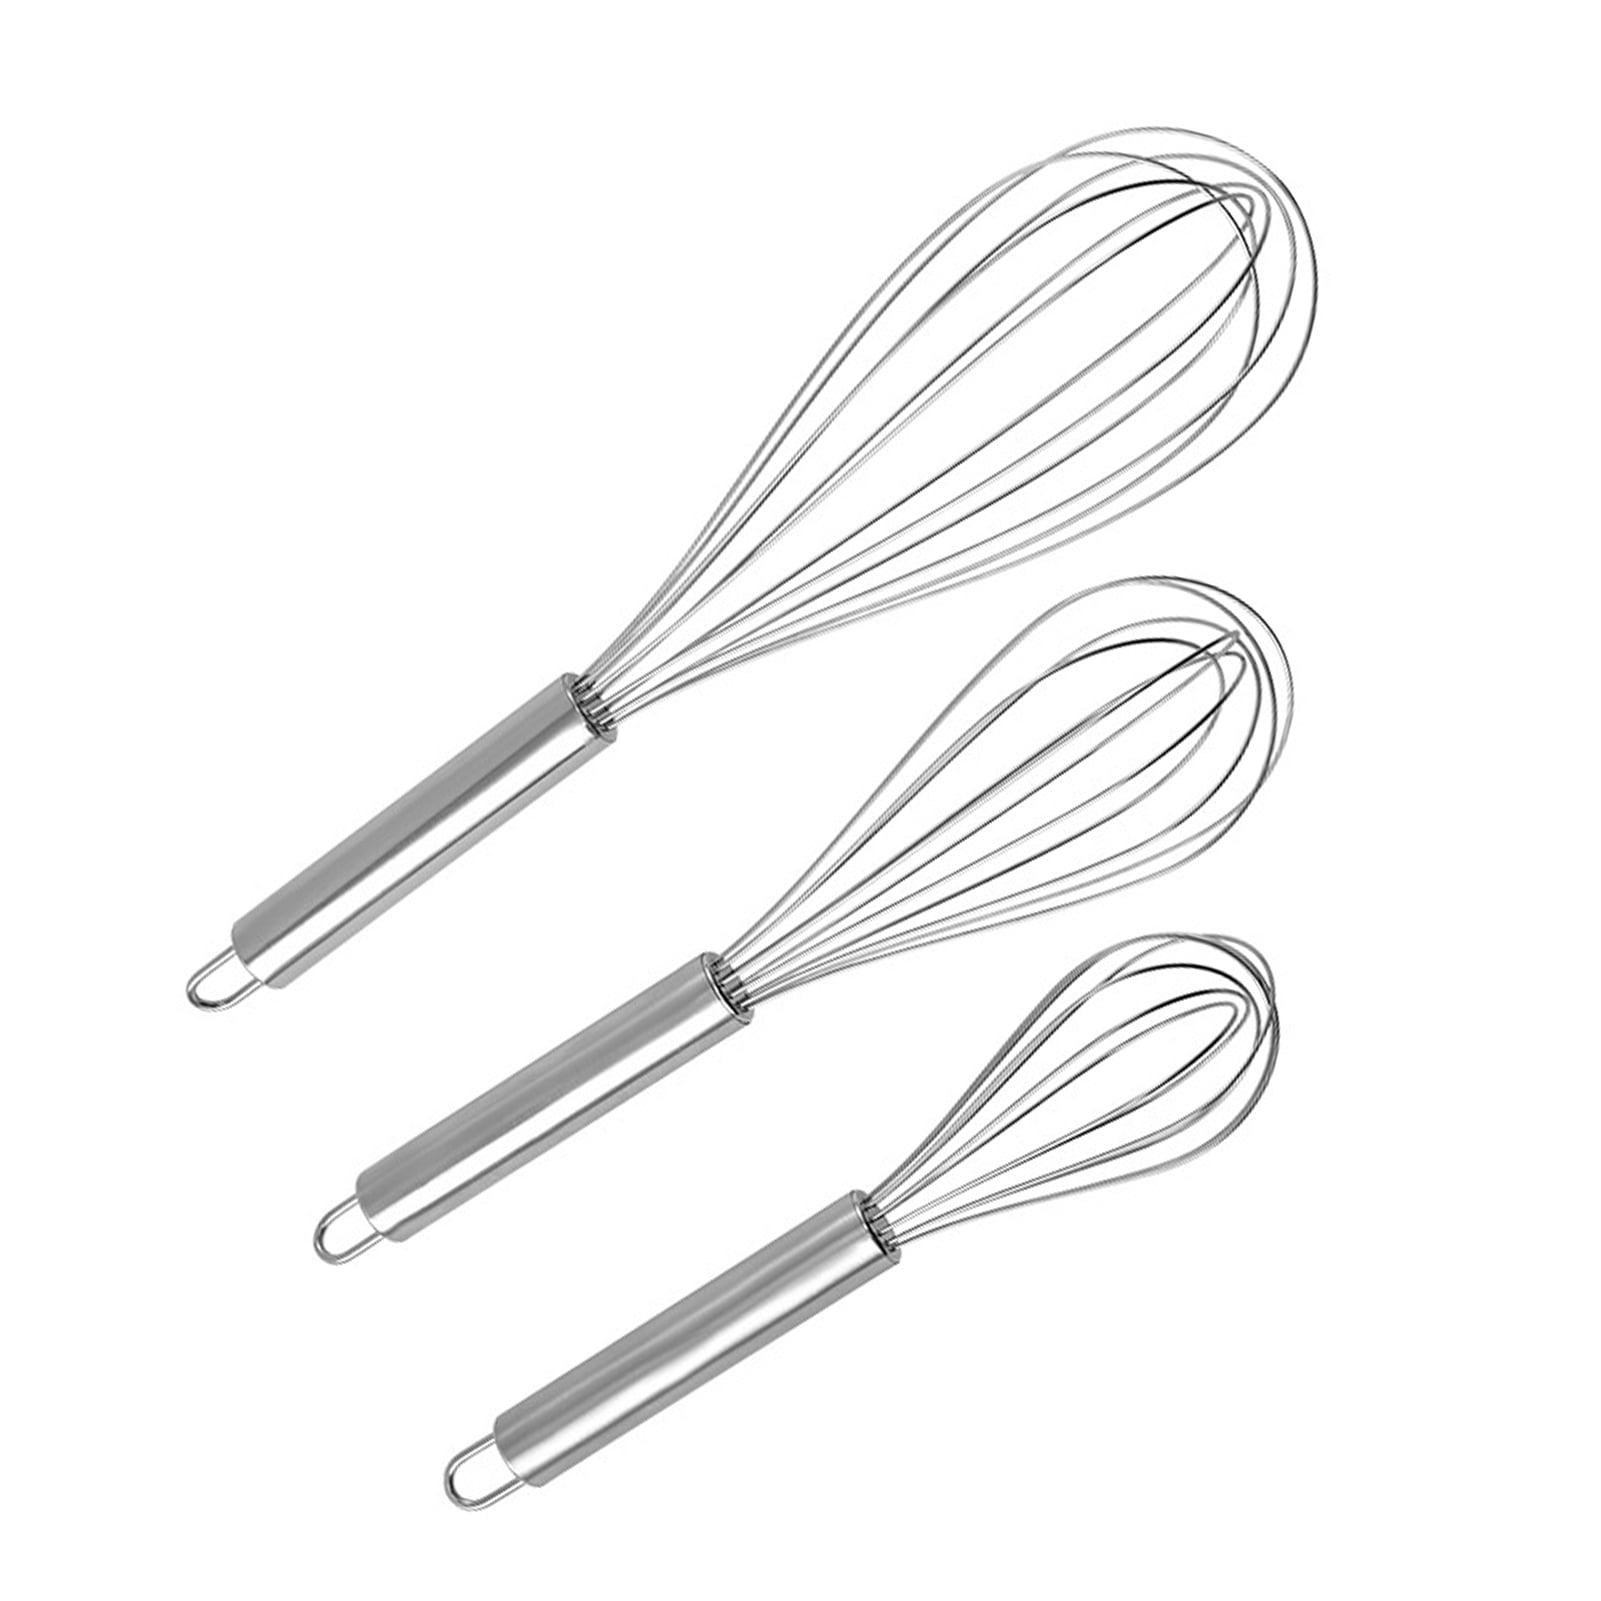 Bodundirect Premium Stainless Steel Wire Whisk 8 10 12 Balloon Set for  Cooking Blending Whisking Stirring Egg Beater Kitchen Wisk Tool 3 Pack